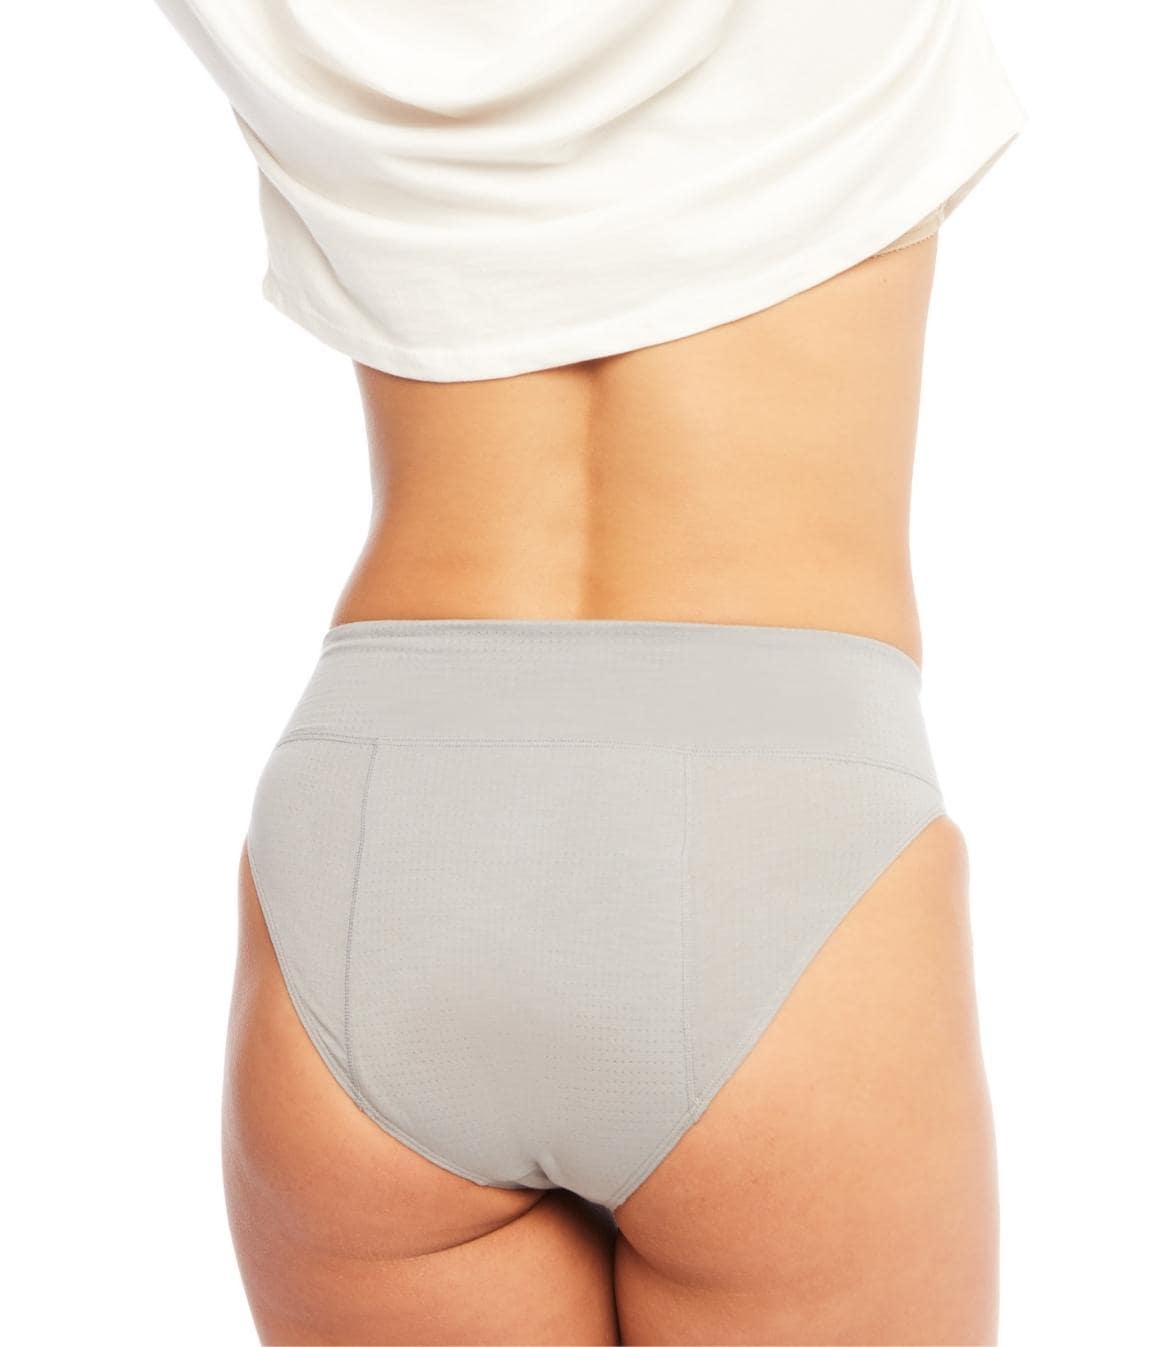 Introducing BASE: Period Underwear for People on the Go – Aisle